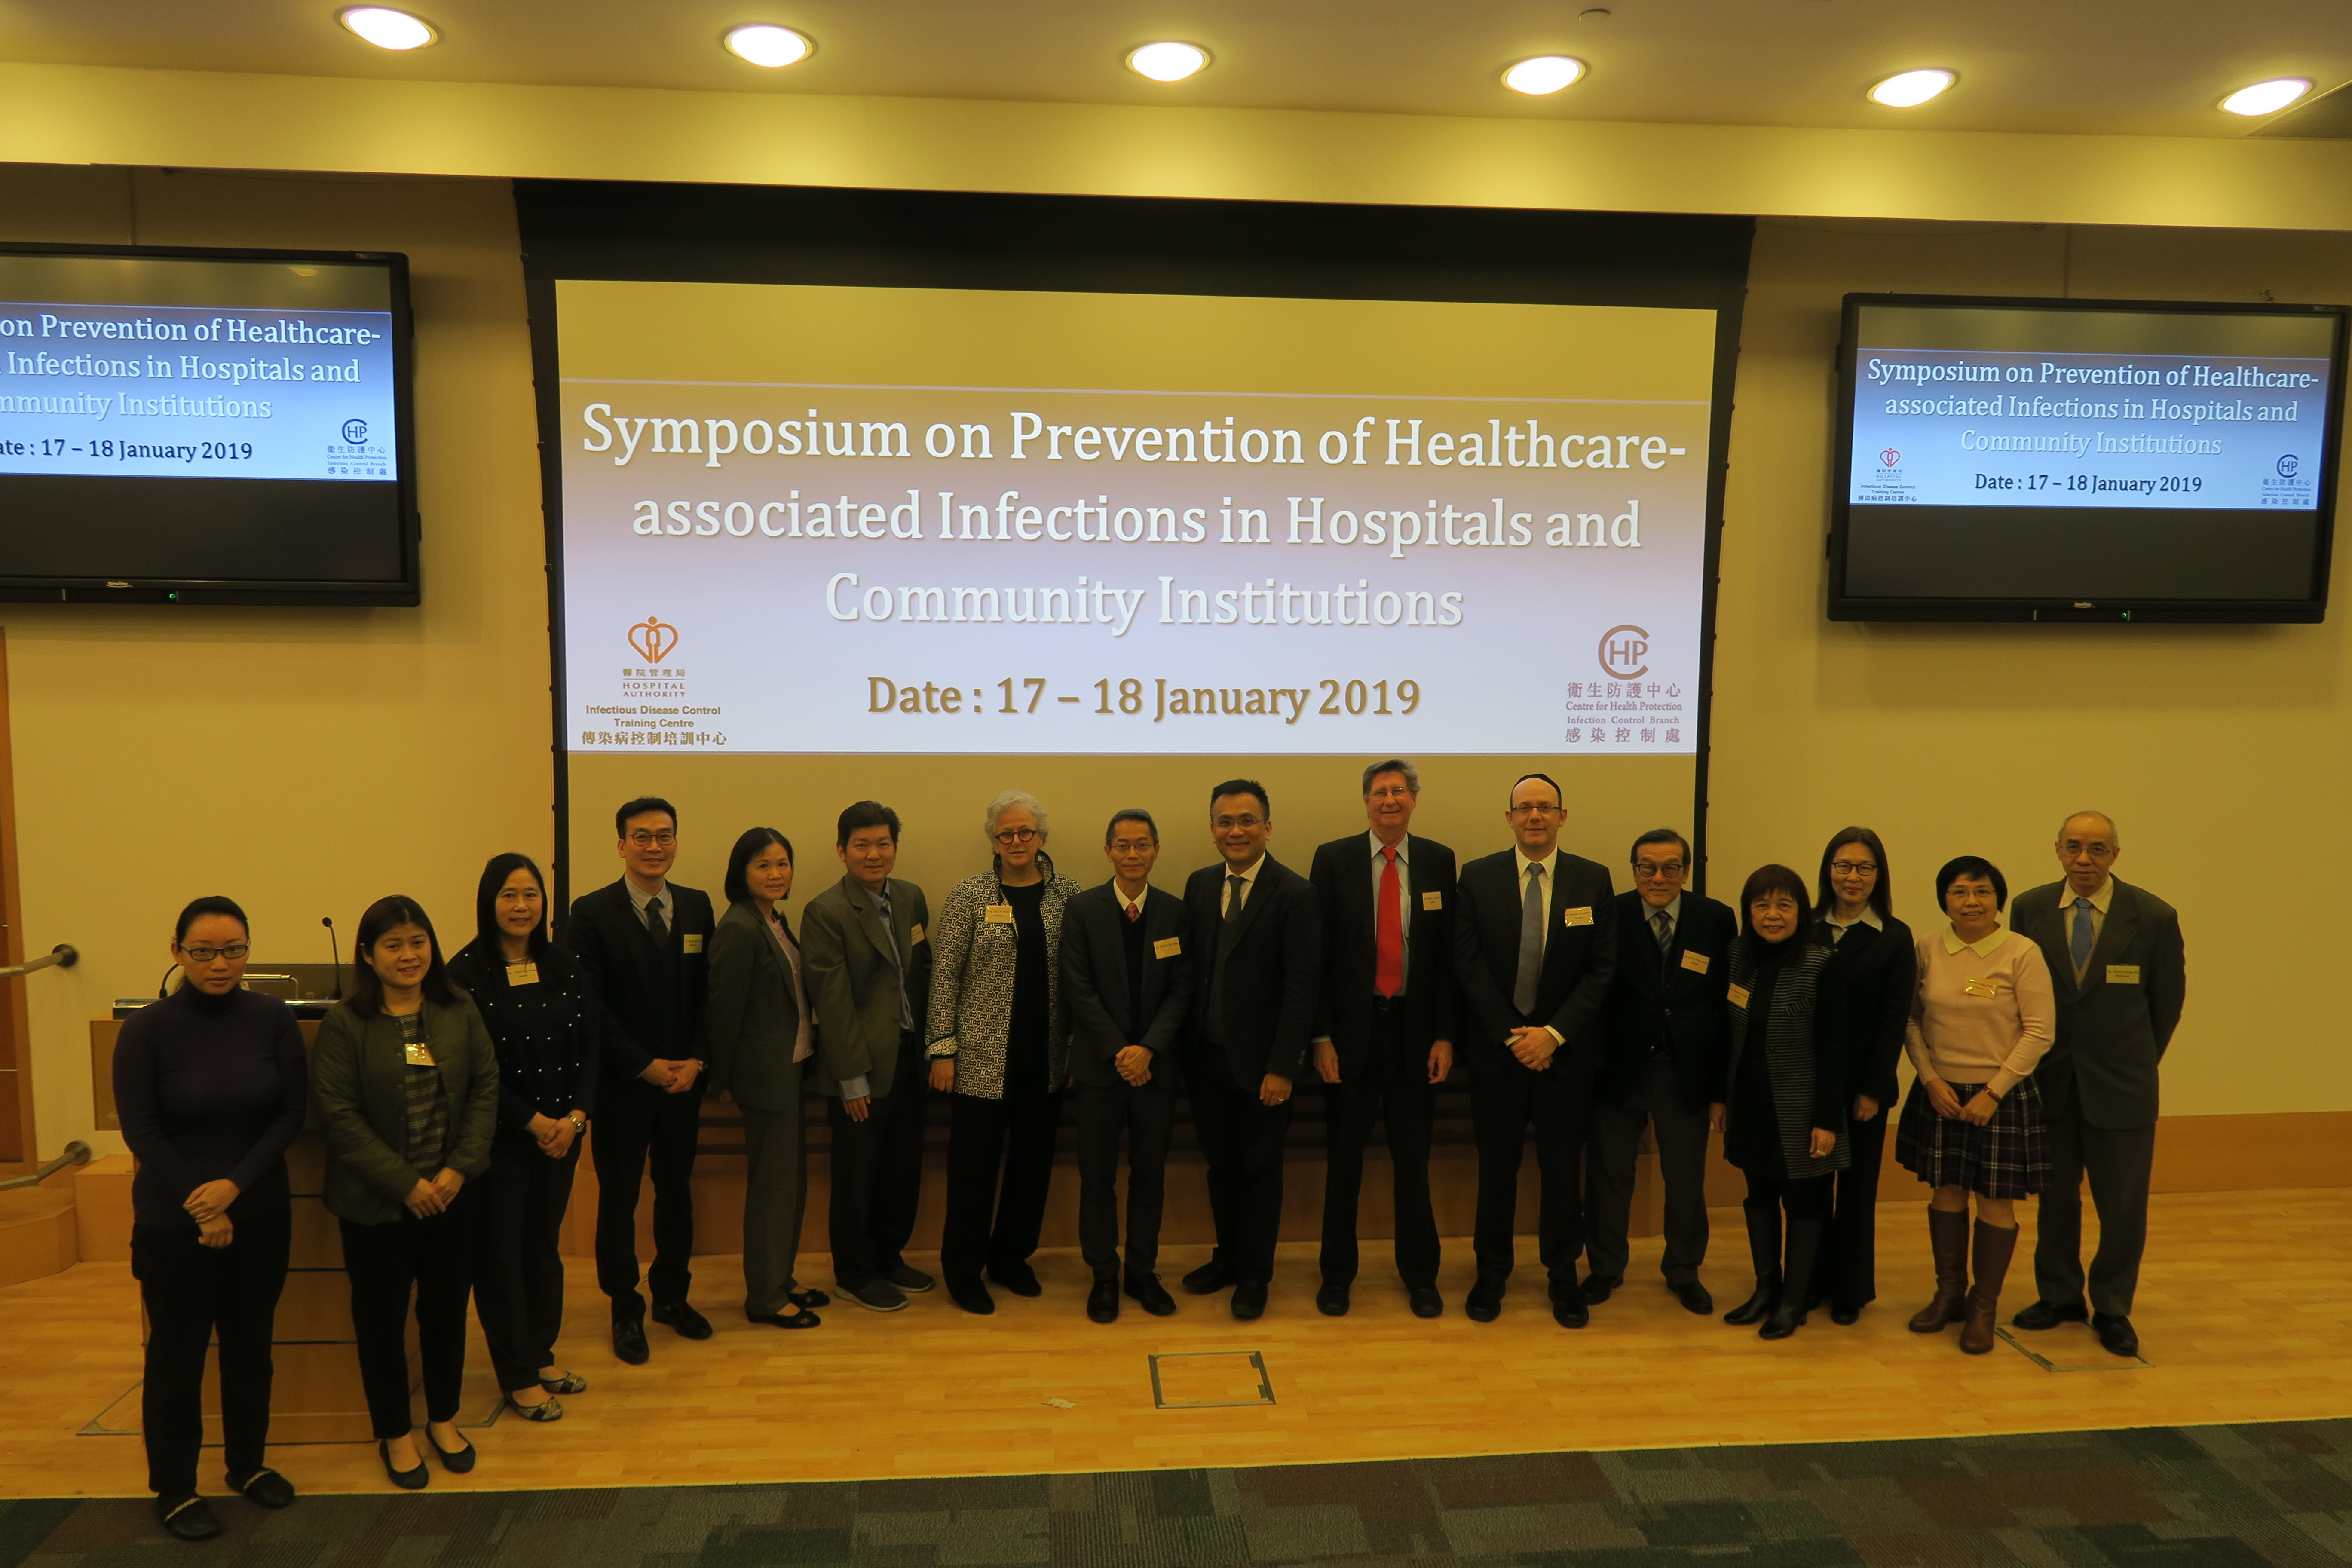 Symposium on Prevention of Healthcare-associated Infections in Hospitals and Community Institutions thumbnail